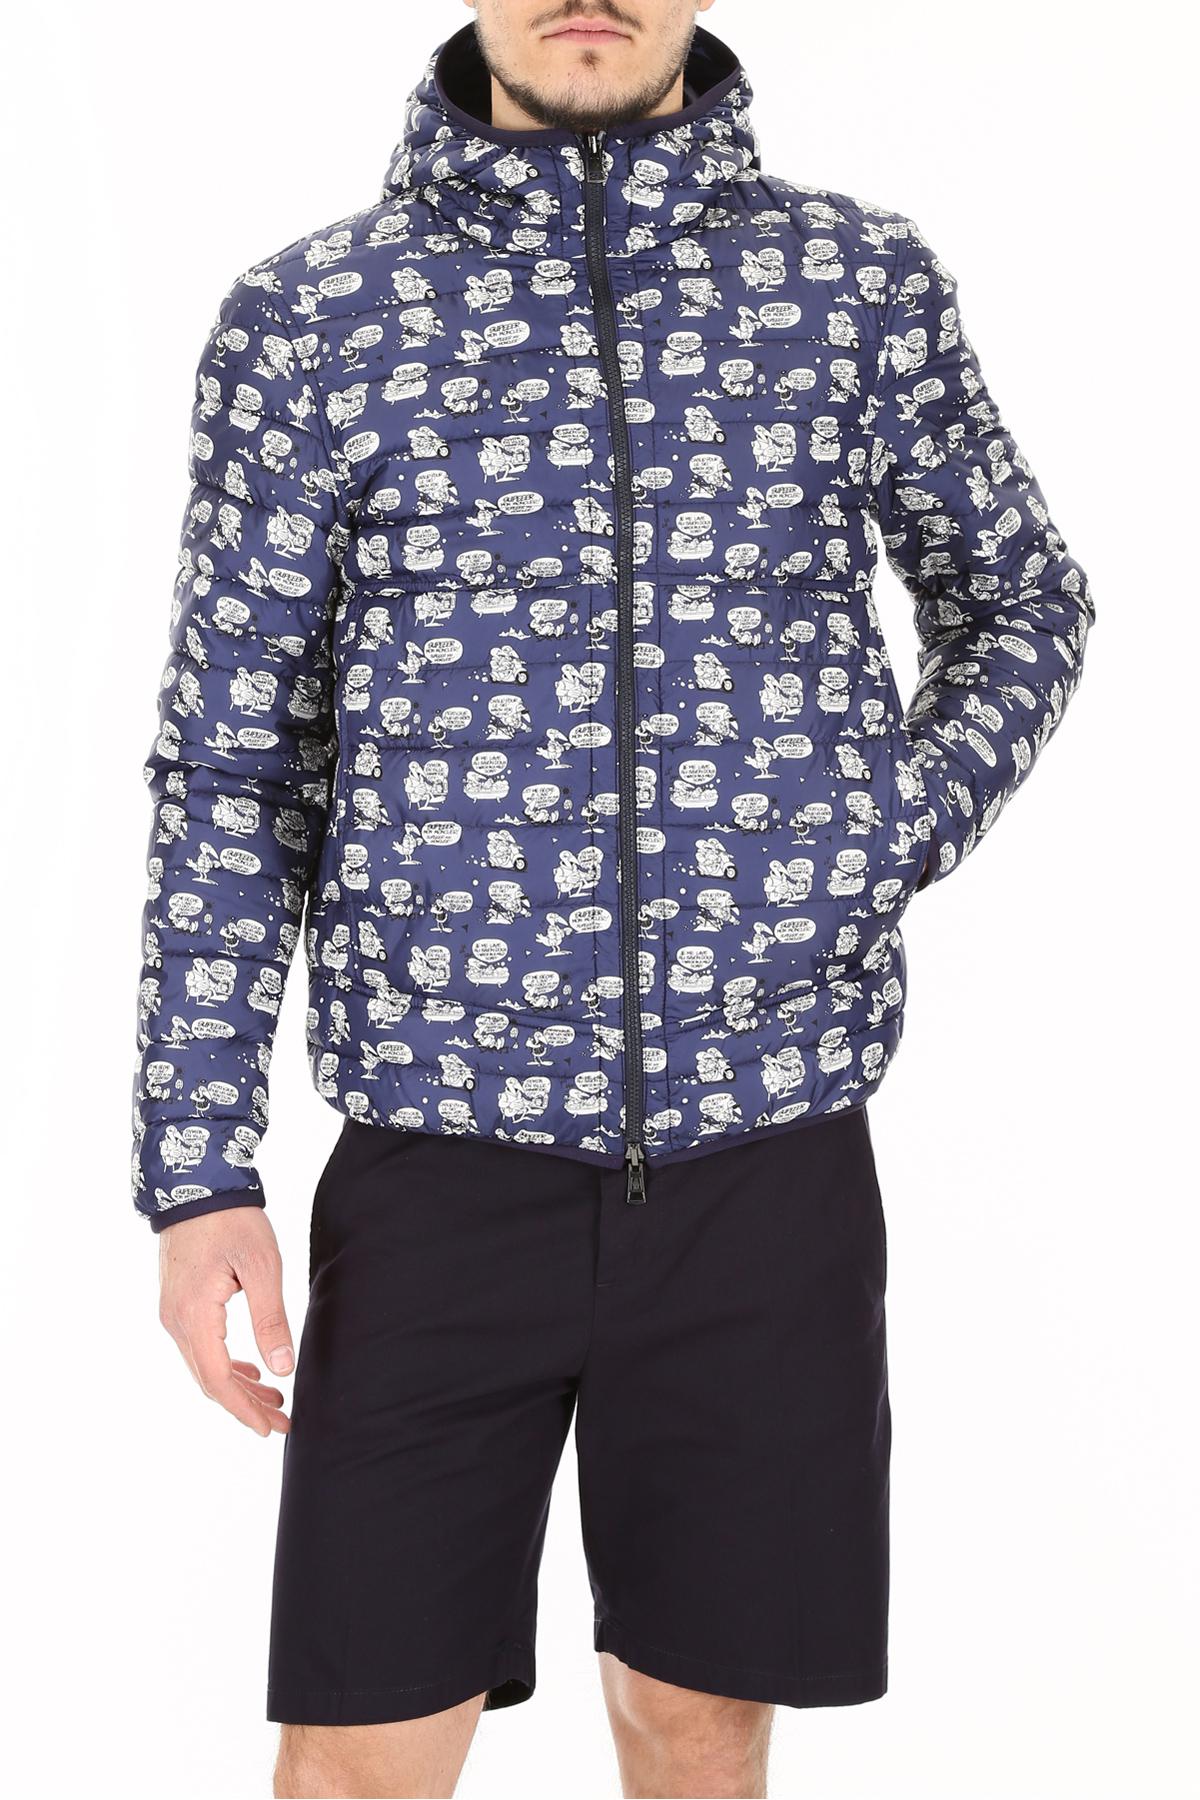 Moncler Reversible Jacket Clearance, 66% OFF | www.ilpungolo.org